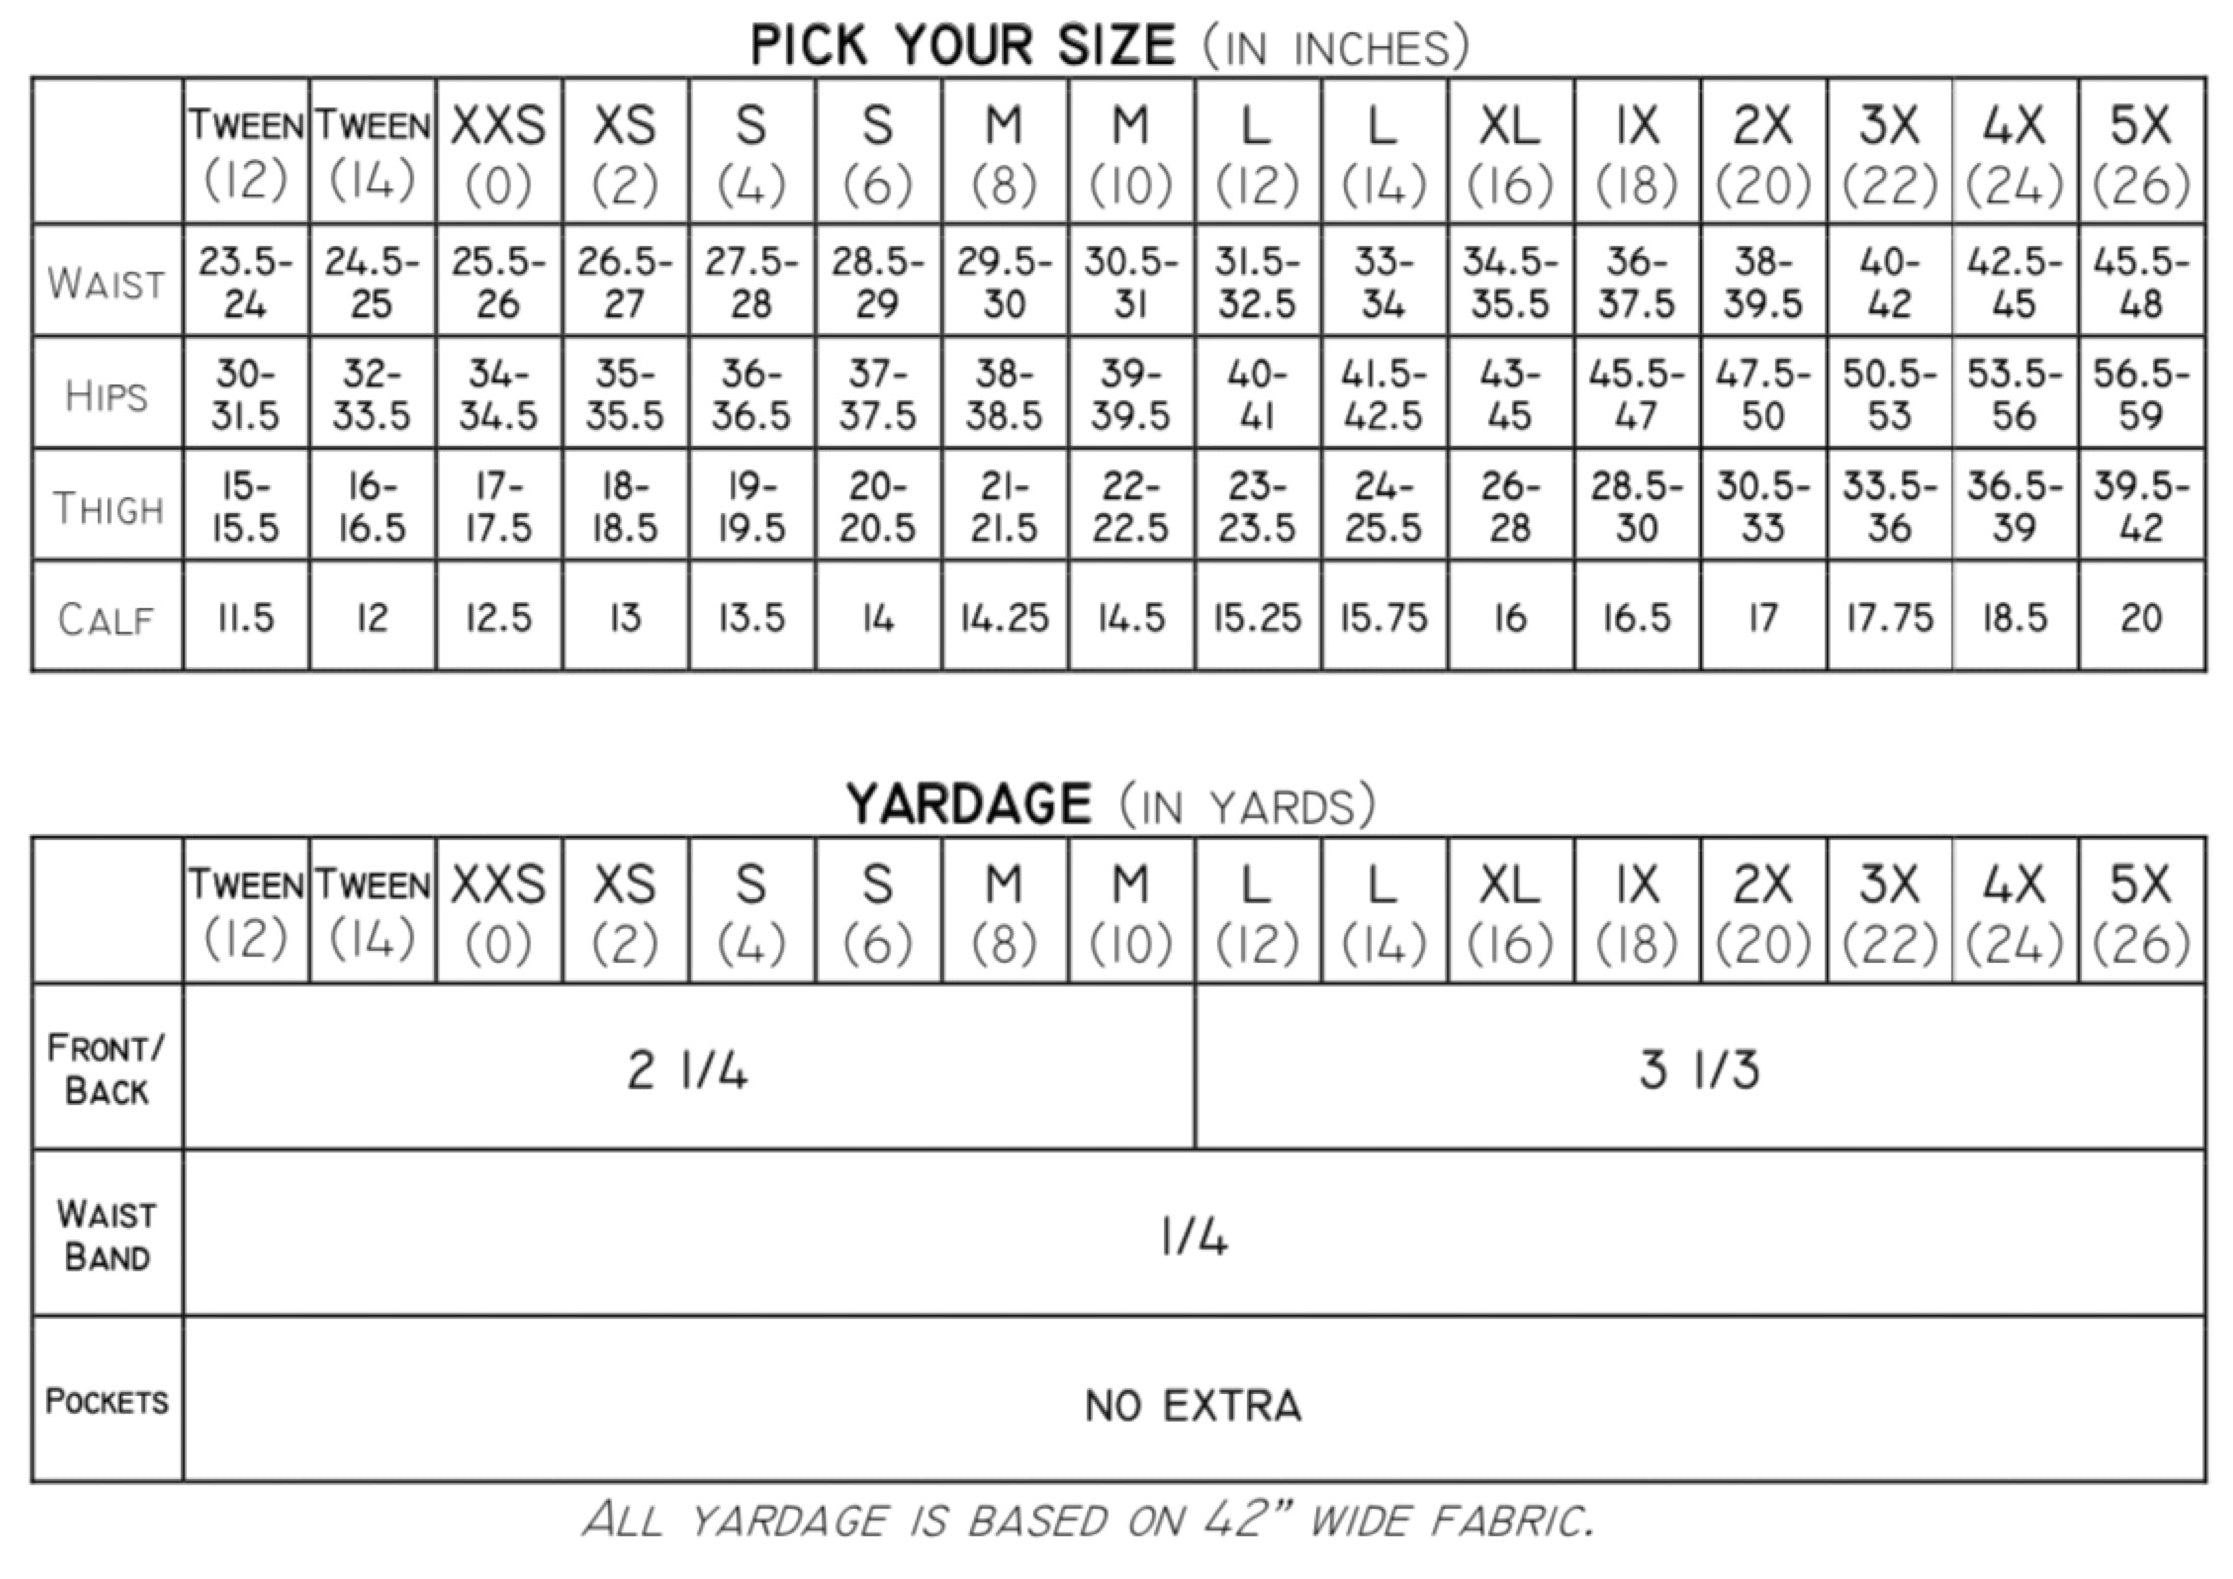 All Patterns (old size chart) – Page 4 – George And Ginger Patterns